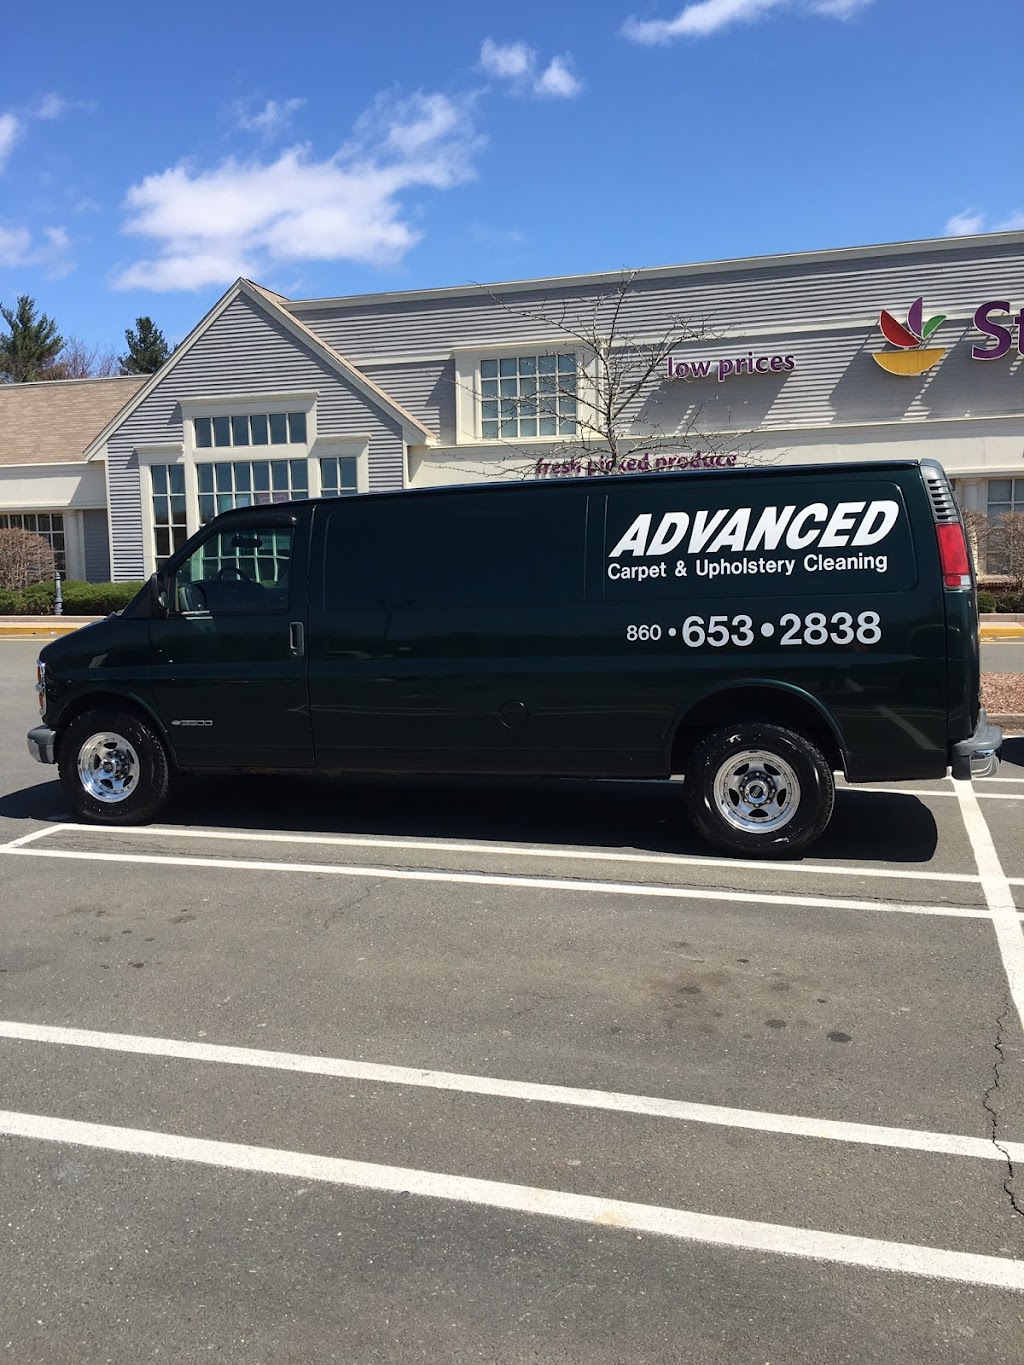 Advanced Carpet & Upholstery | 8 Zimmer Rd, Granby, CT 06035 | Phone: (860) 653-2838